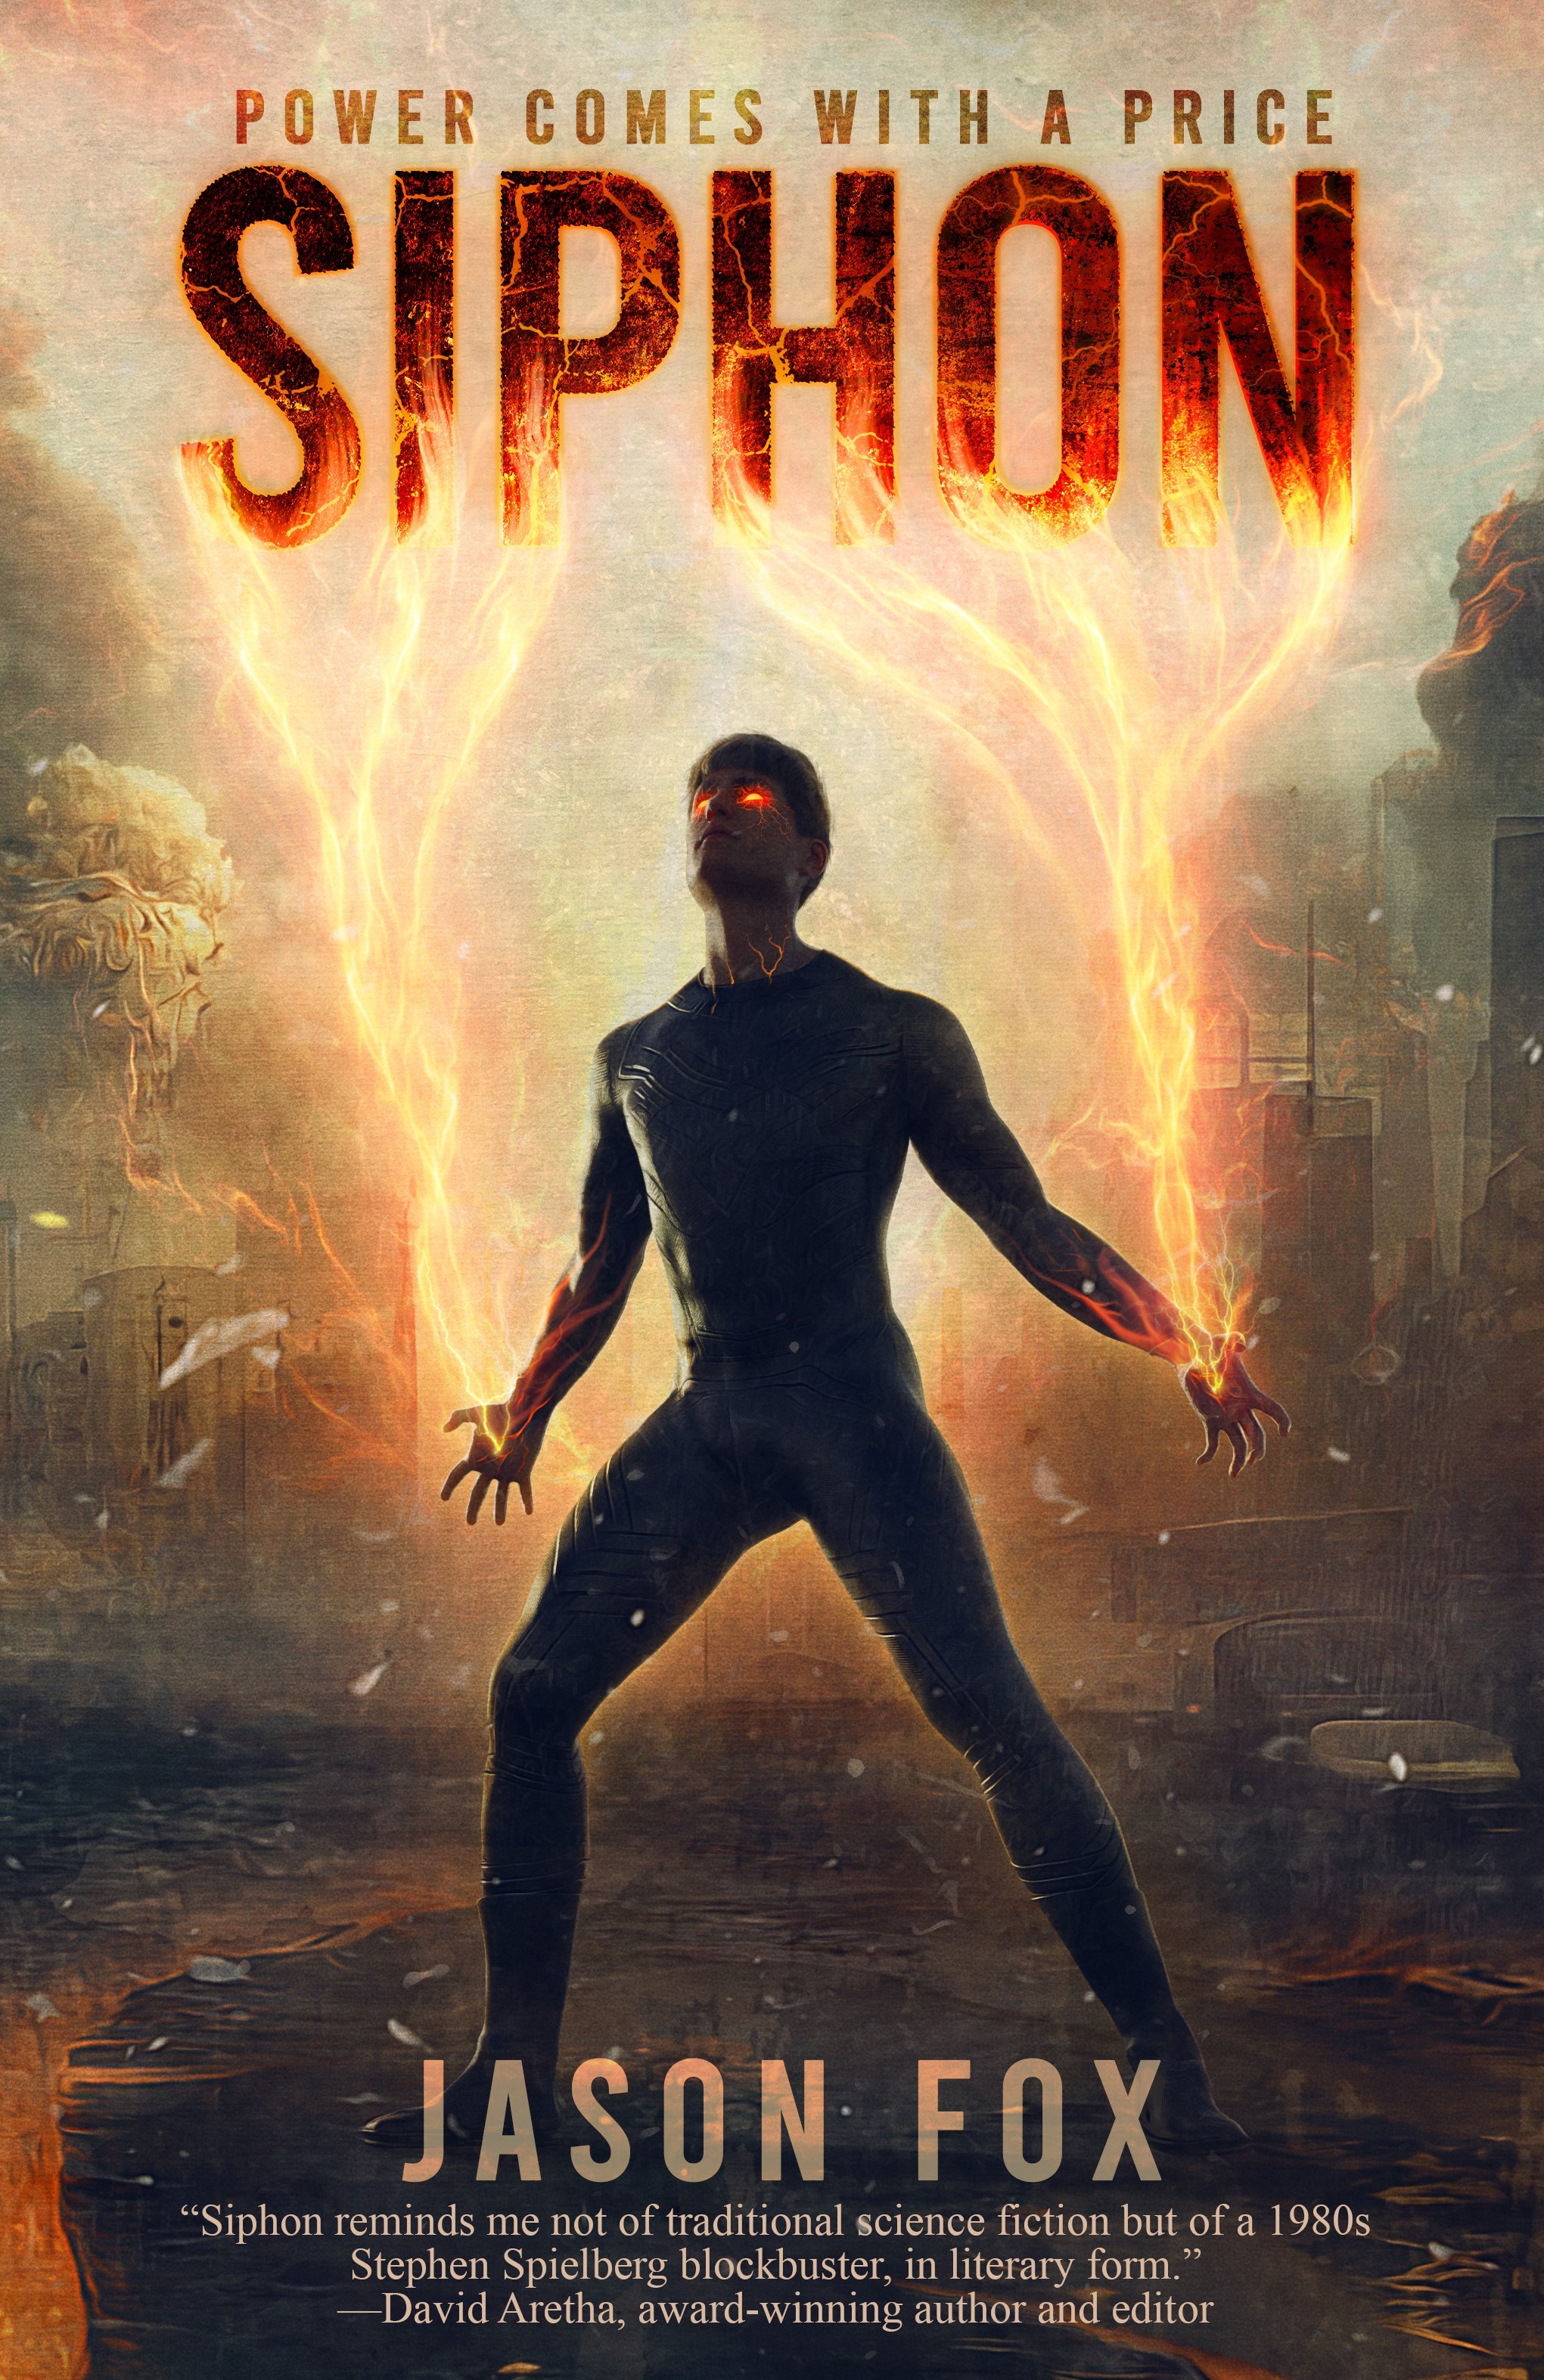 Cover of Jason Fox's science fiction novel Siphon: Power Comes with a Price